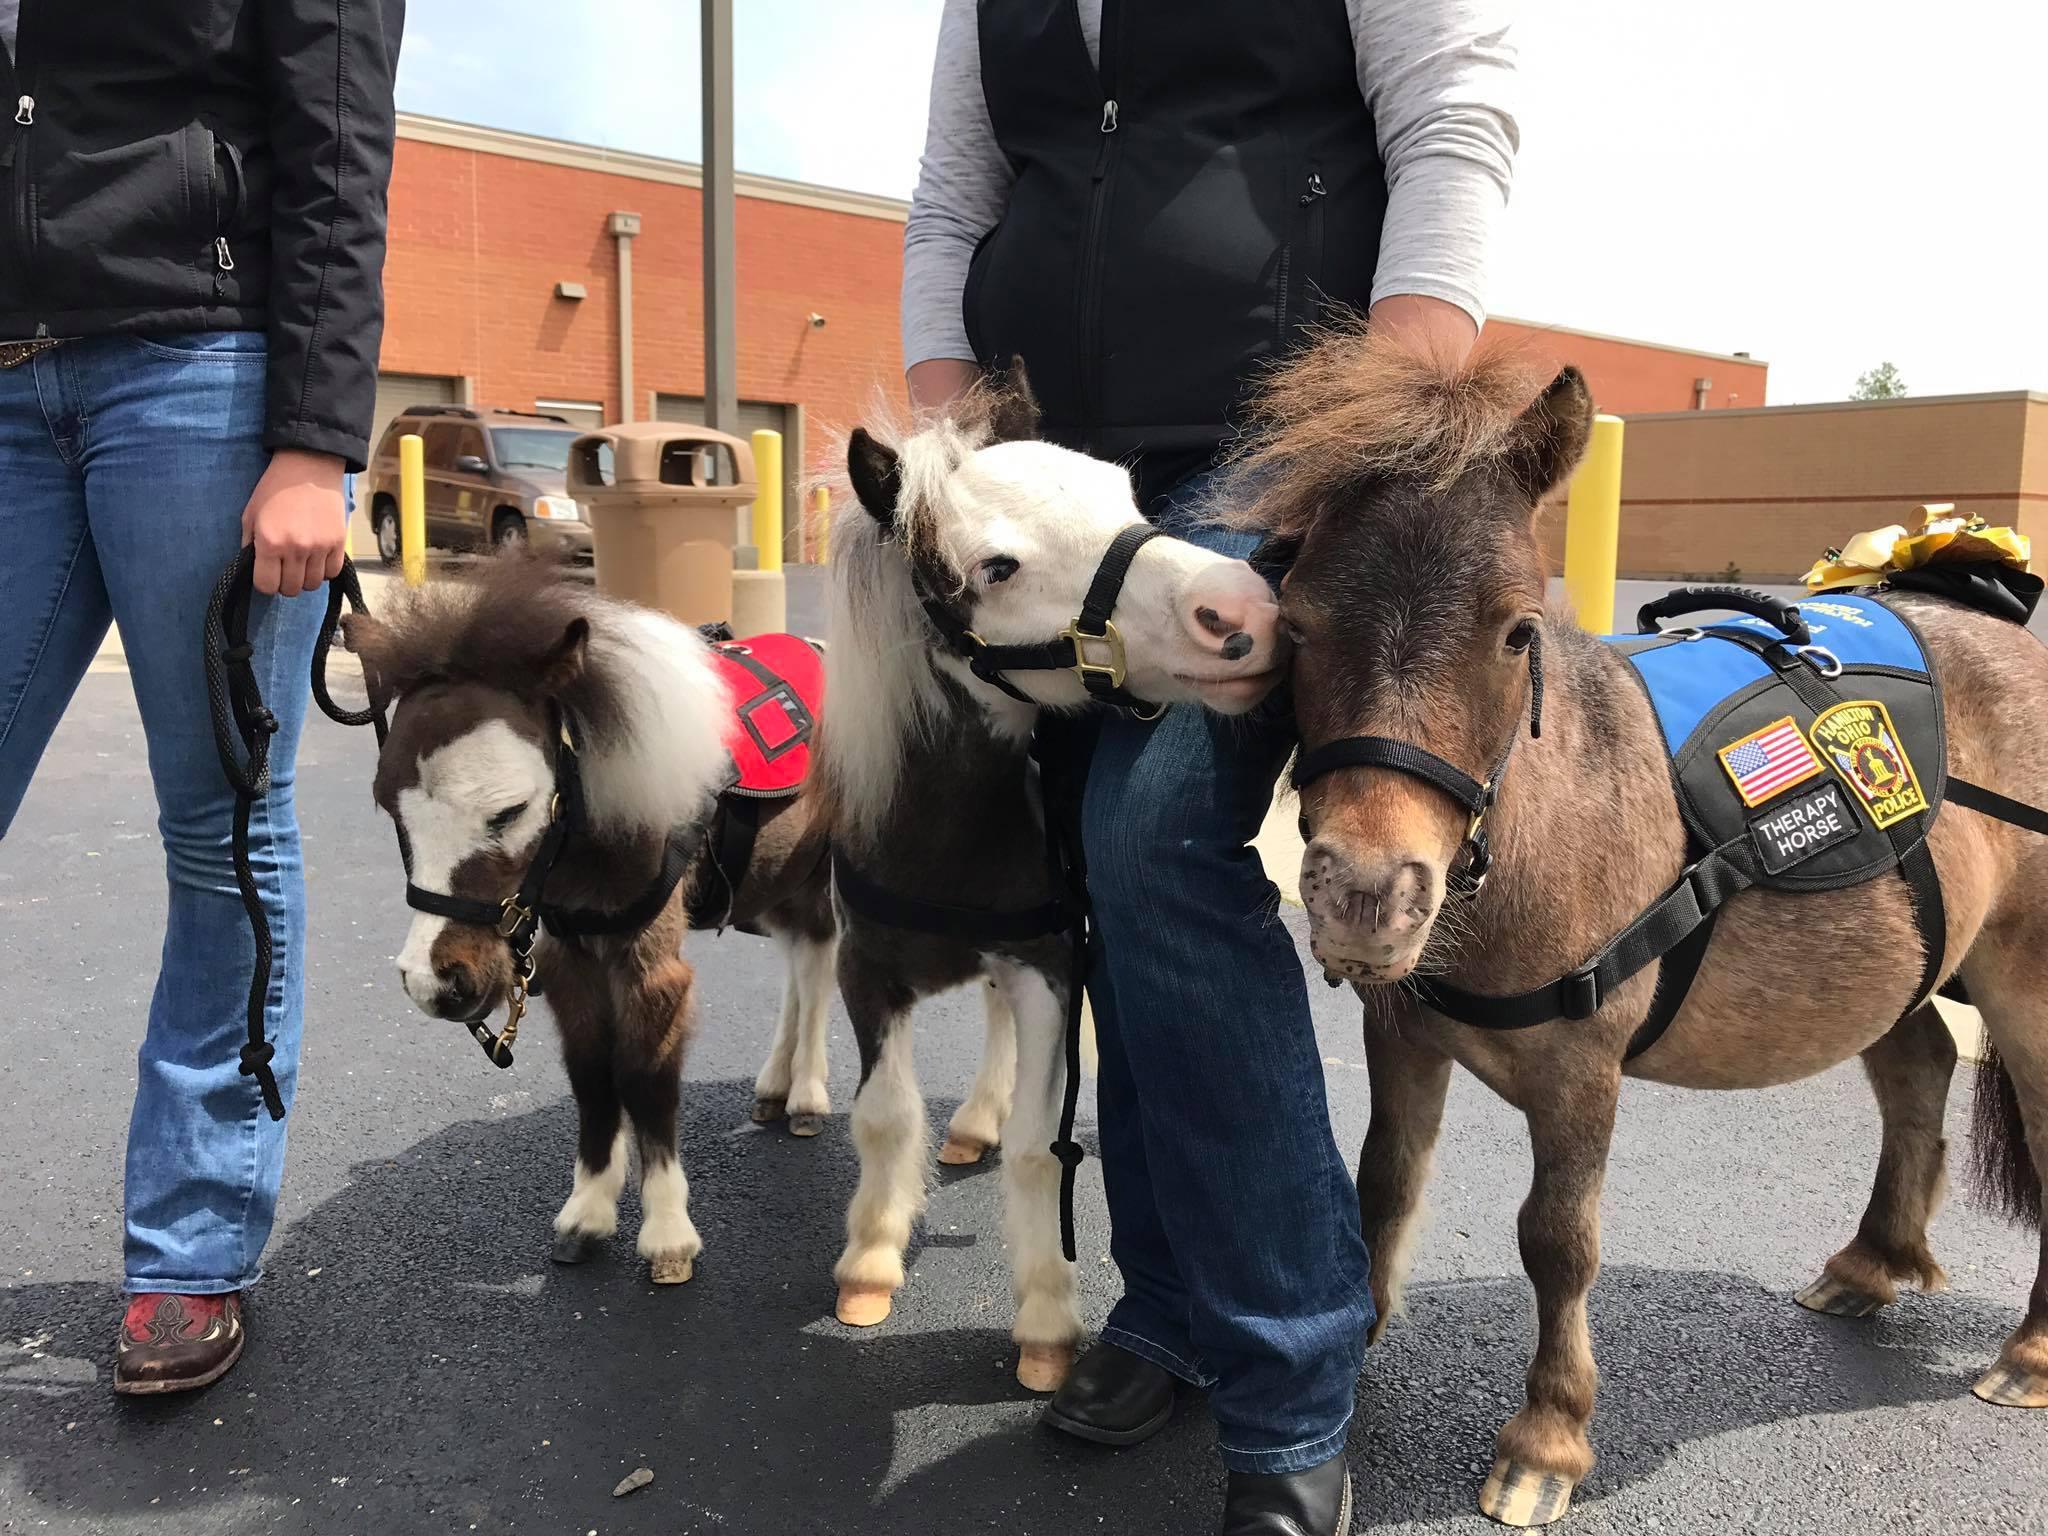 The mini horses are trained to deal with the stresses and strains of an airport environment